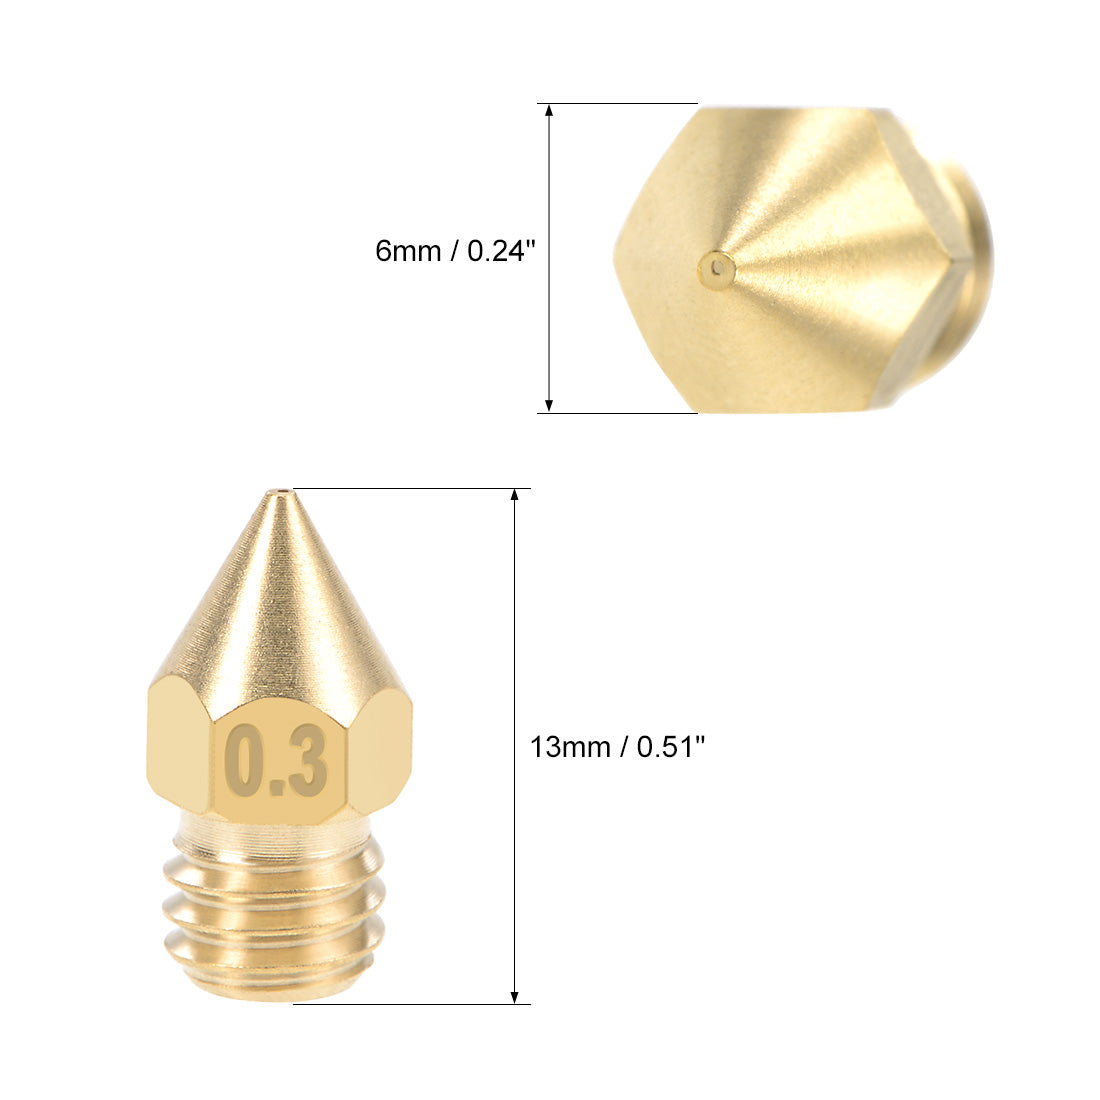 uxcell Uxcell 0.3mm 3D Printer Nozzle Head M6 for MK8 1.75mm Extruder Print, Brass 6pcs